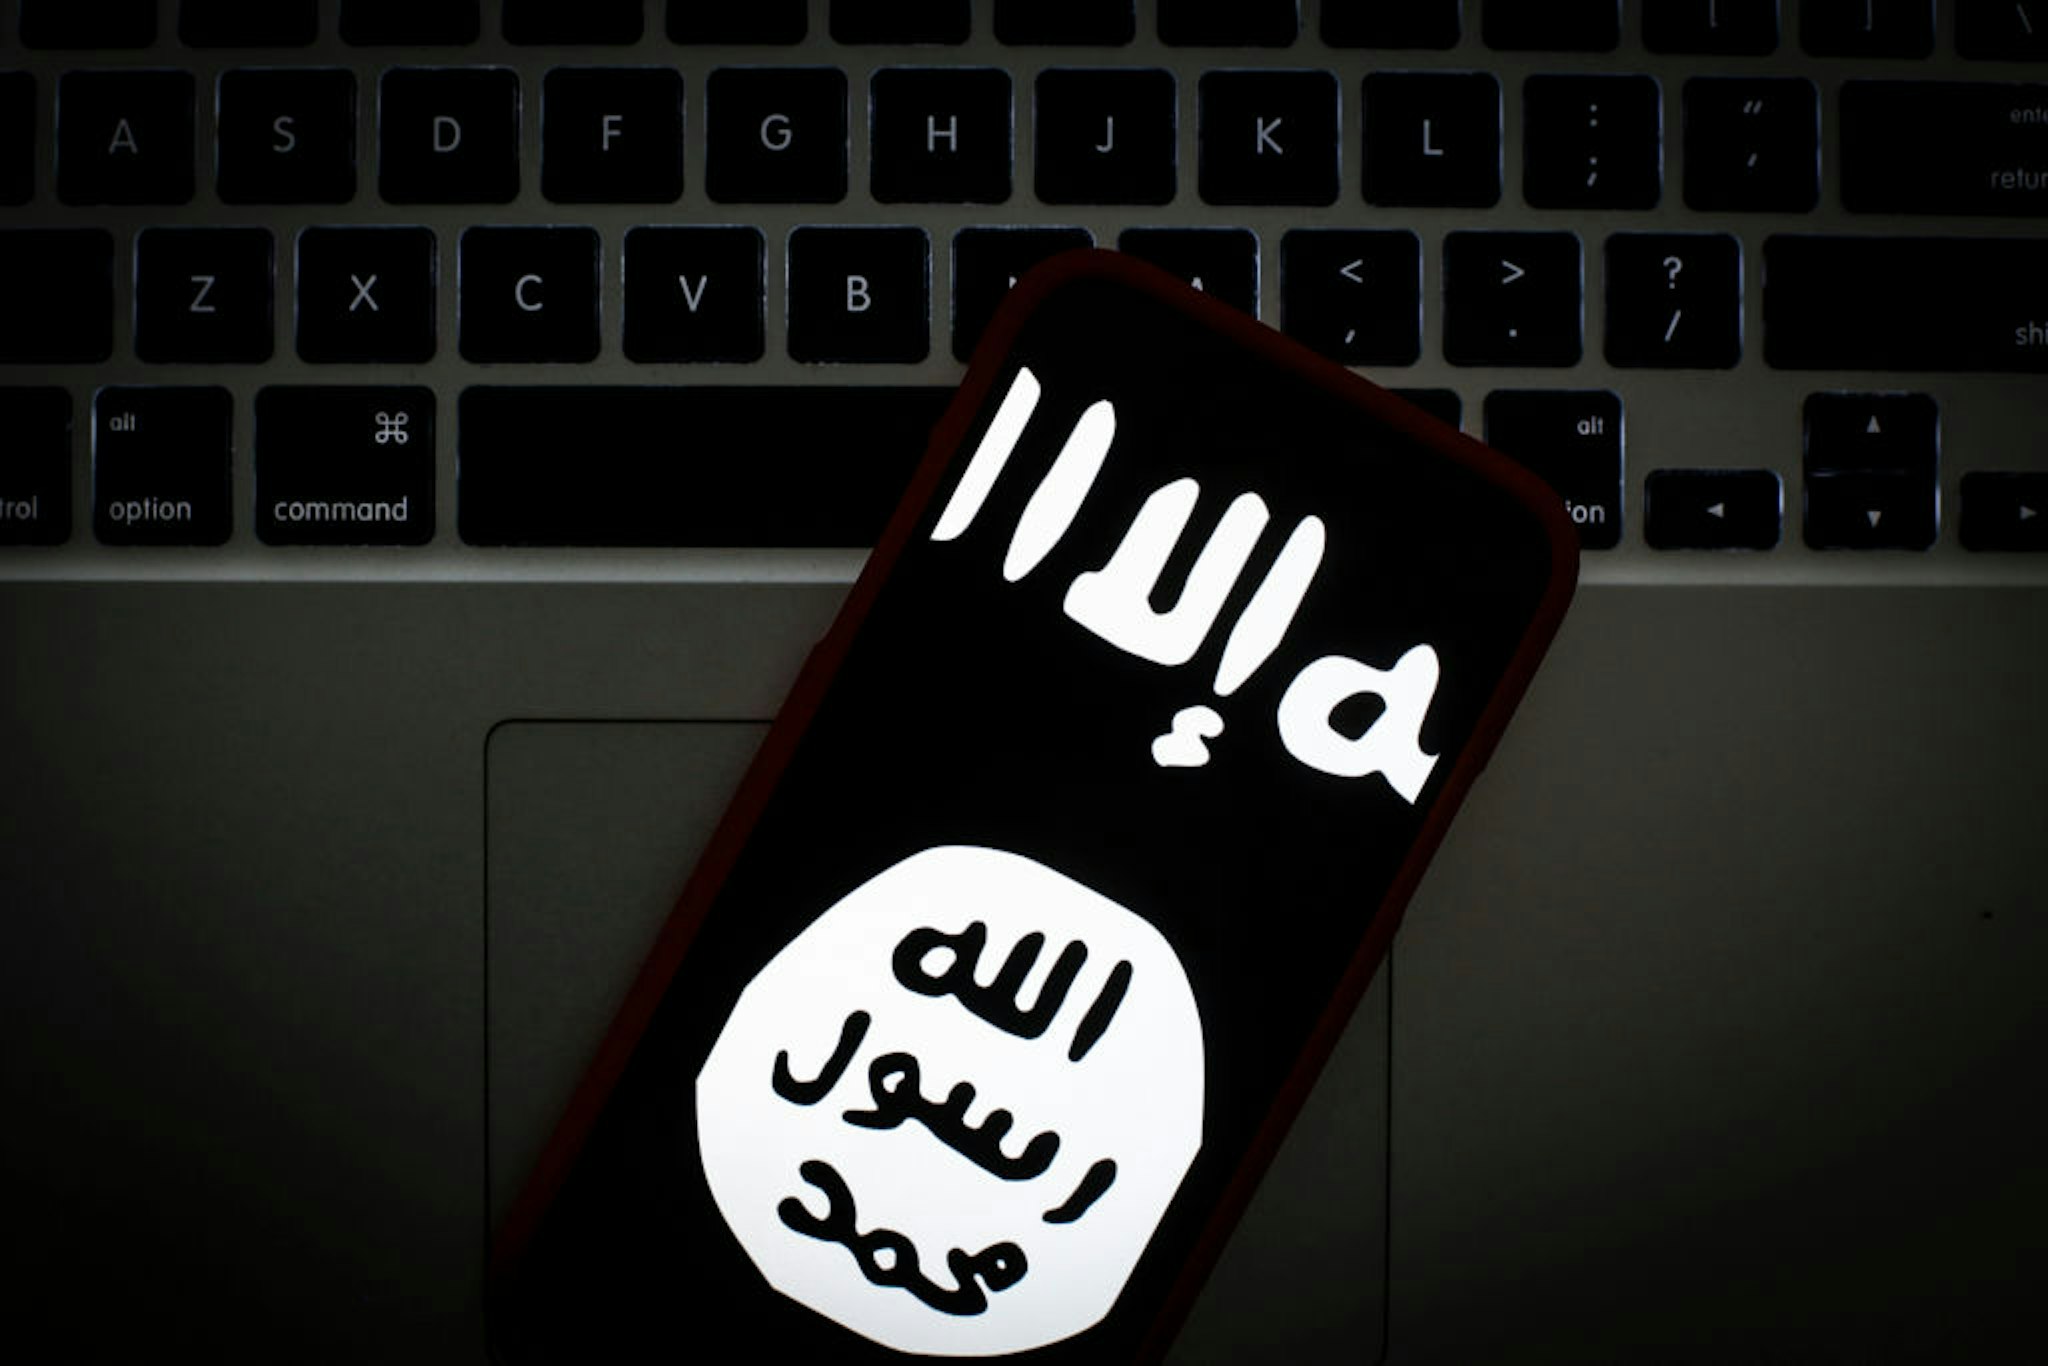 The Islamic State logo is seen on a portable mobile device in this photo illustration on January 22, 2019.